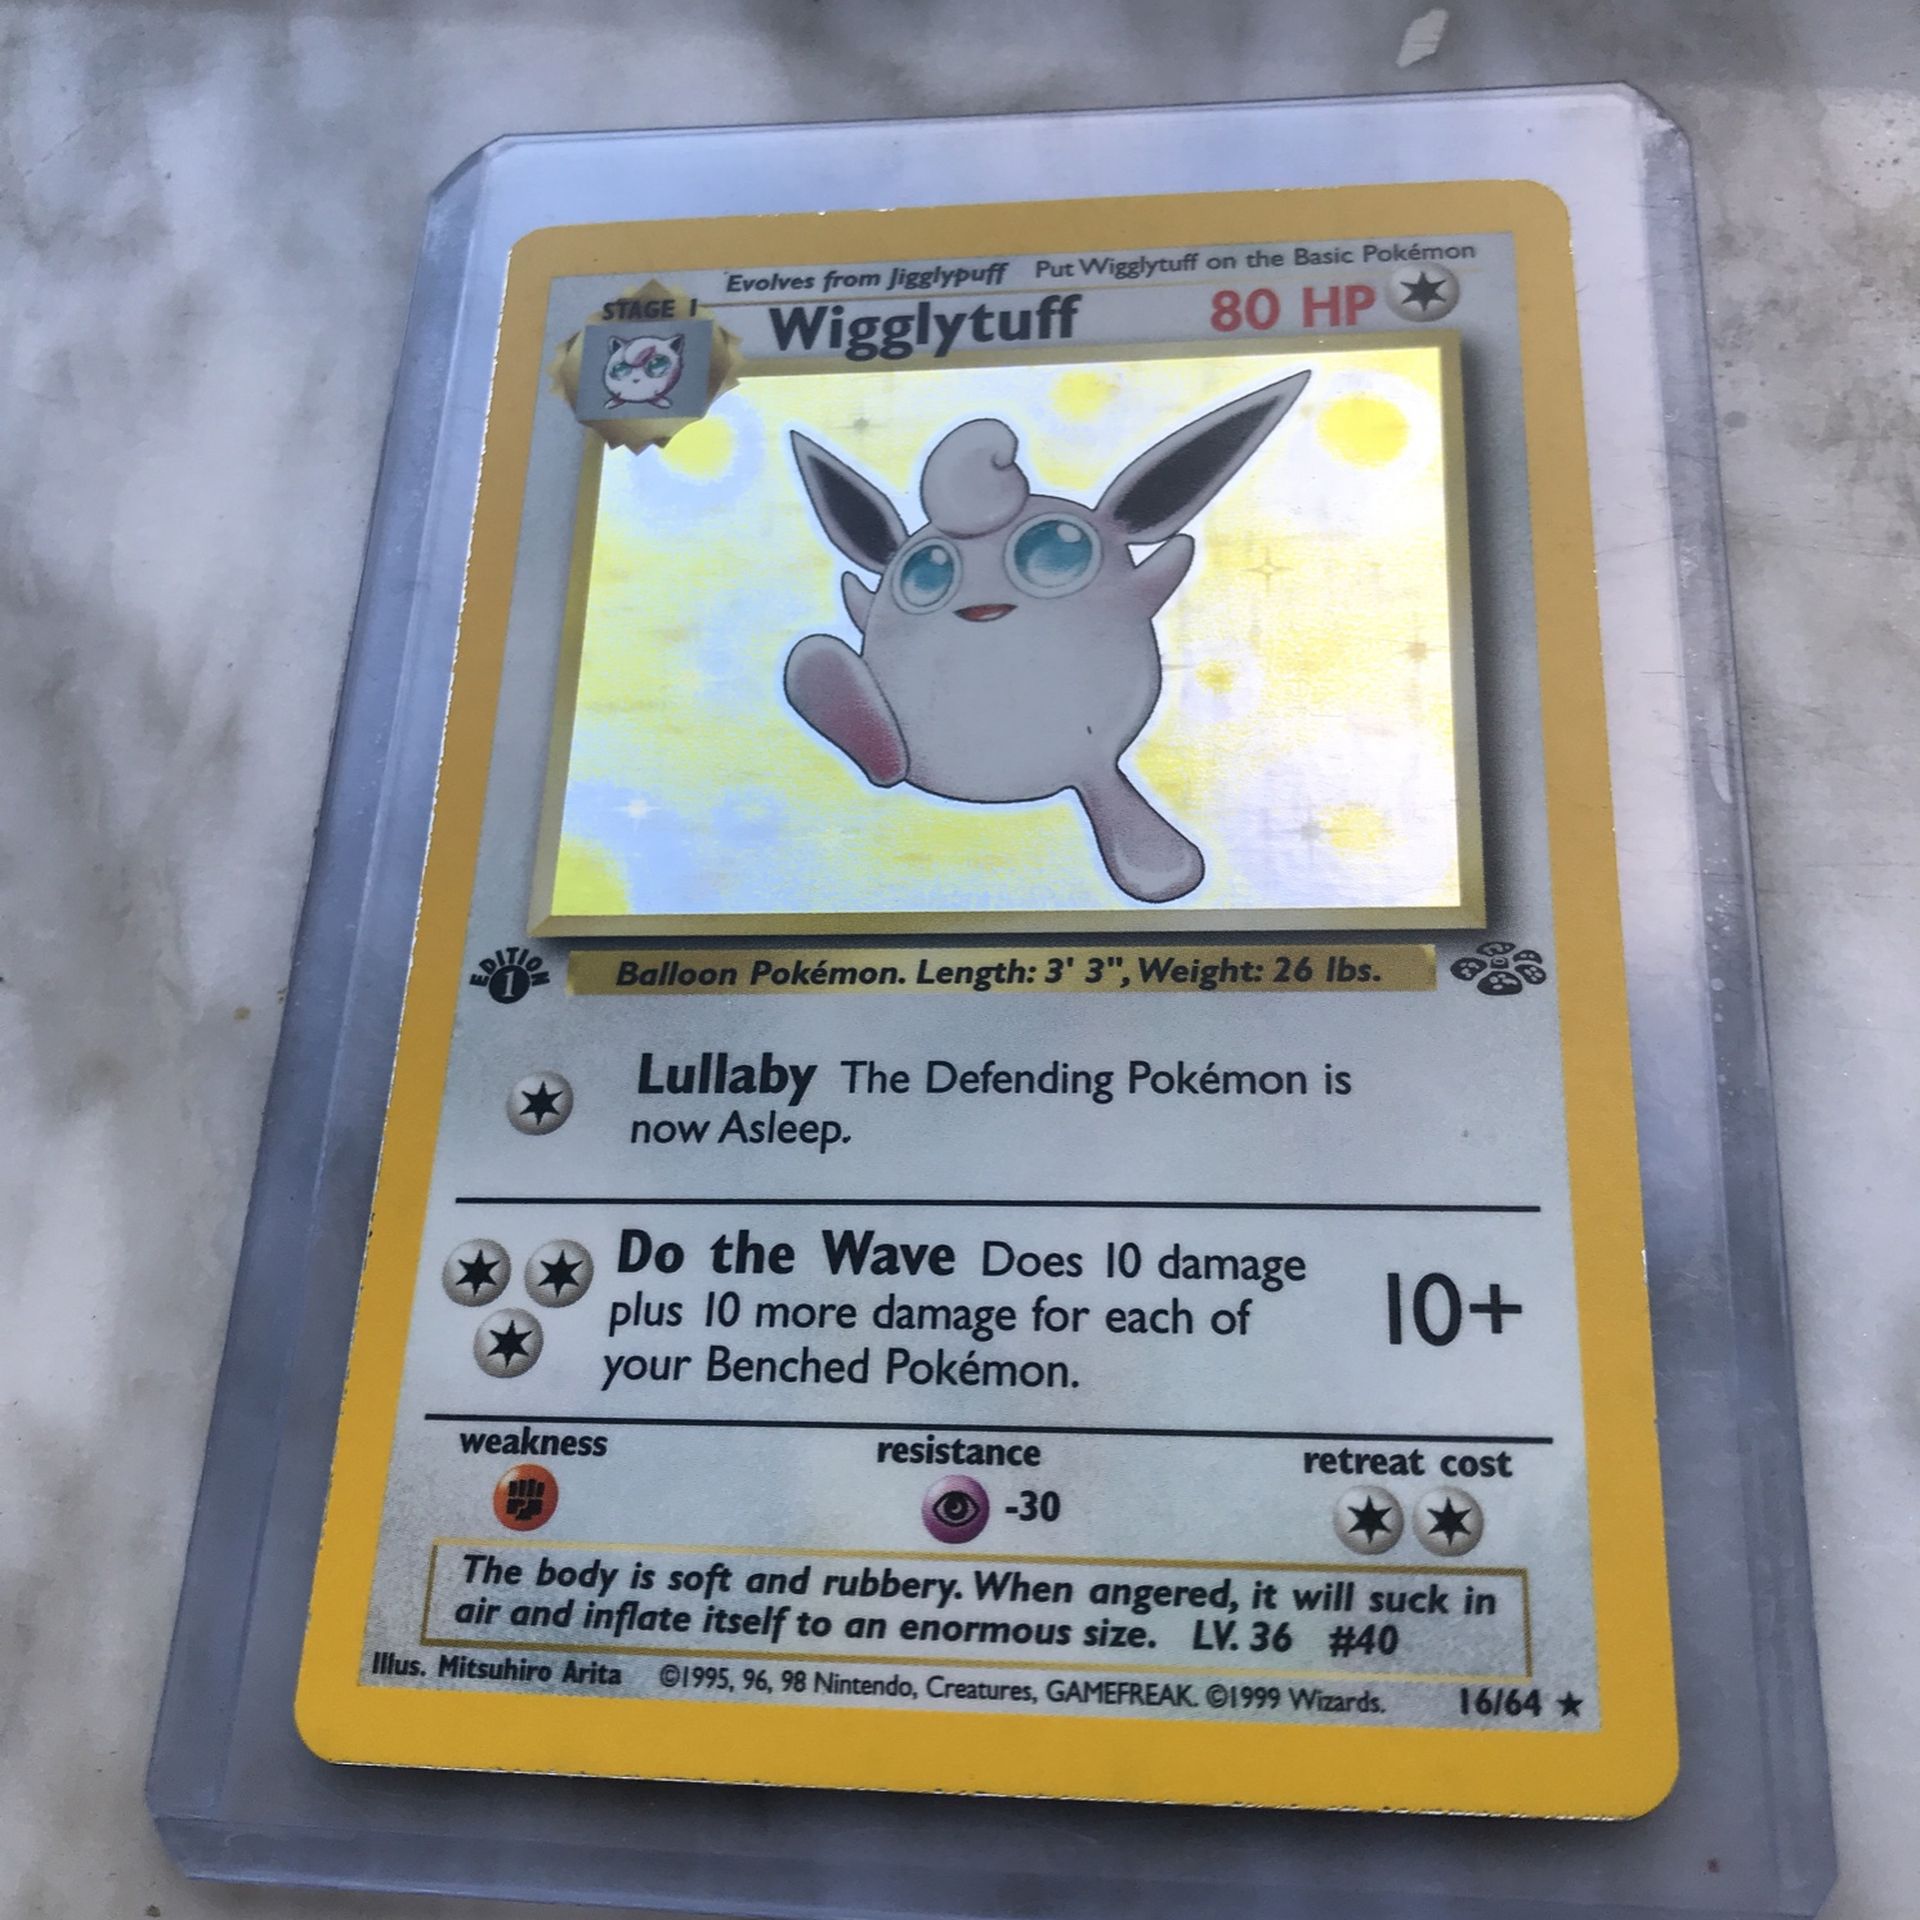 Wigglytuff 1st Edition Pokémon Card In Excellent Condition